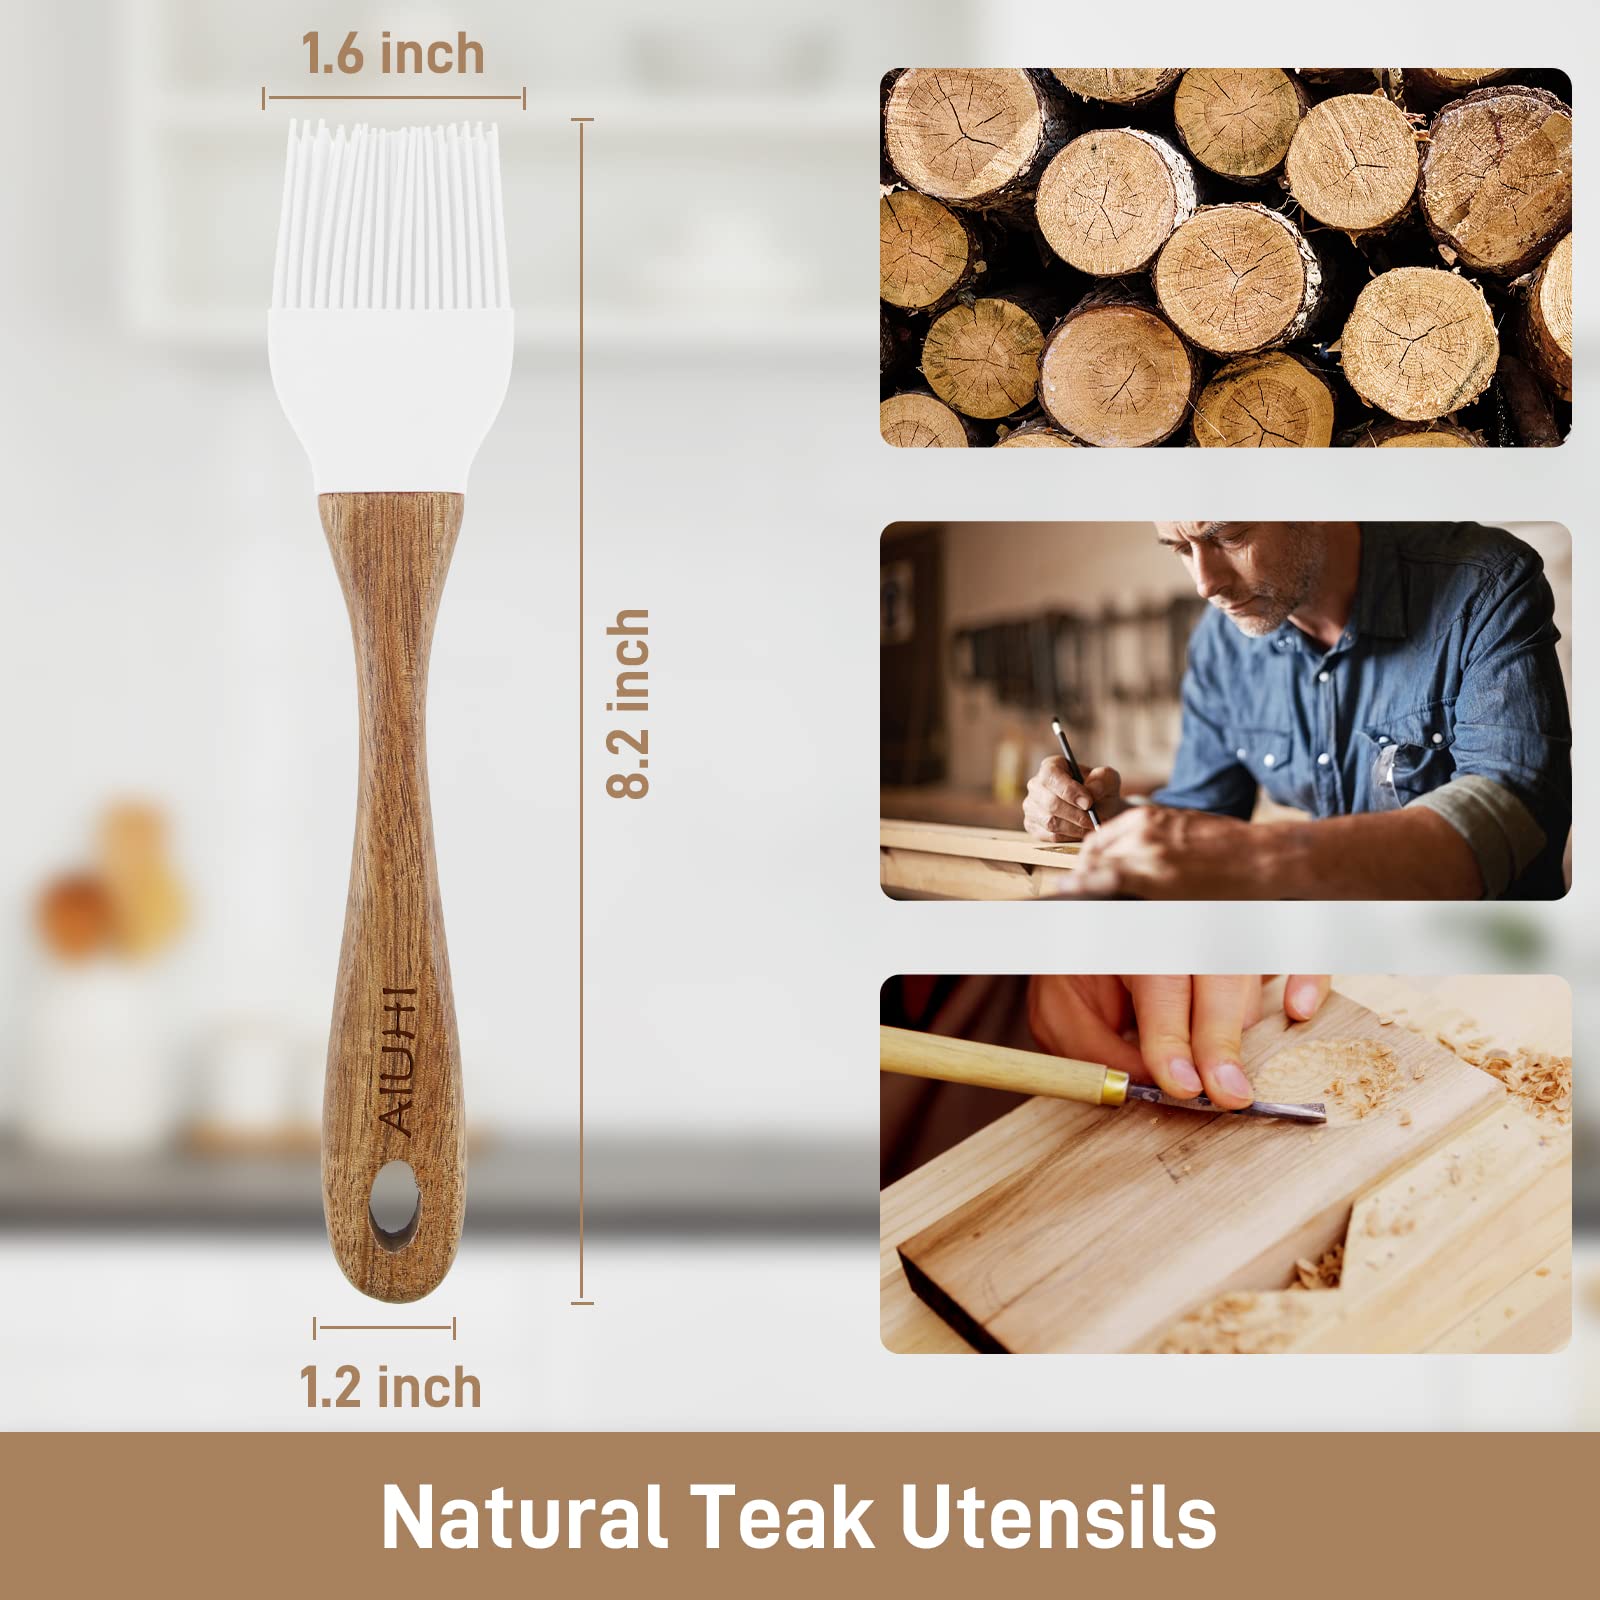 Oil and Butter Brush,Silicone Basting Brush with Wooden Hand,Pastry Brush for Cooking White